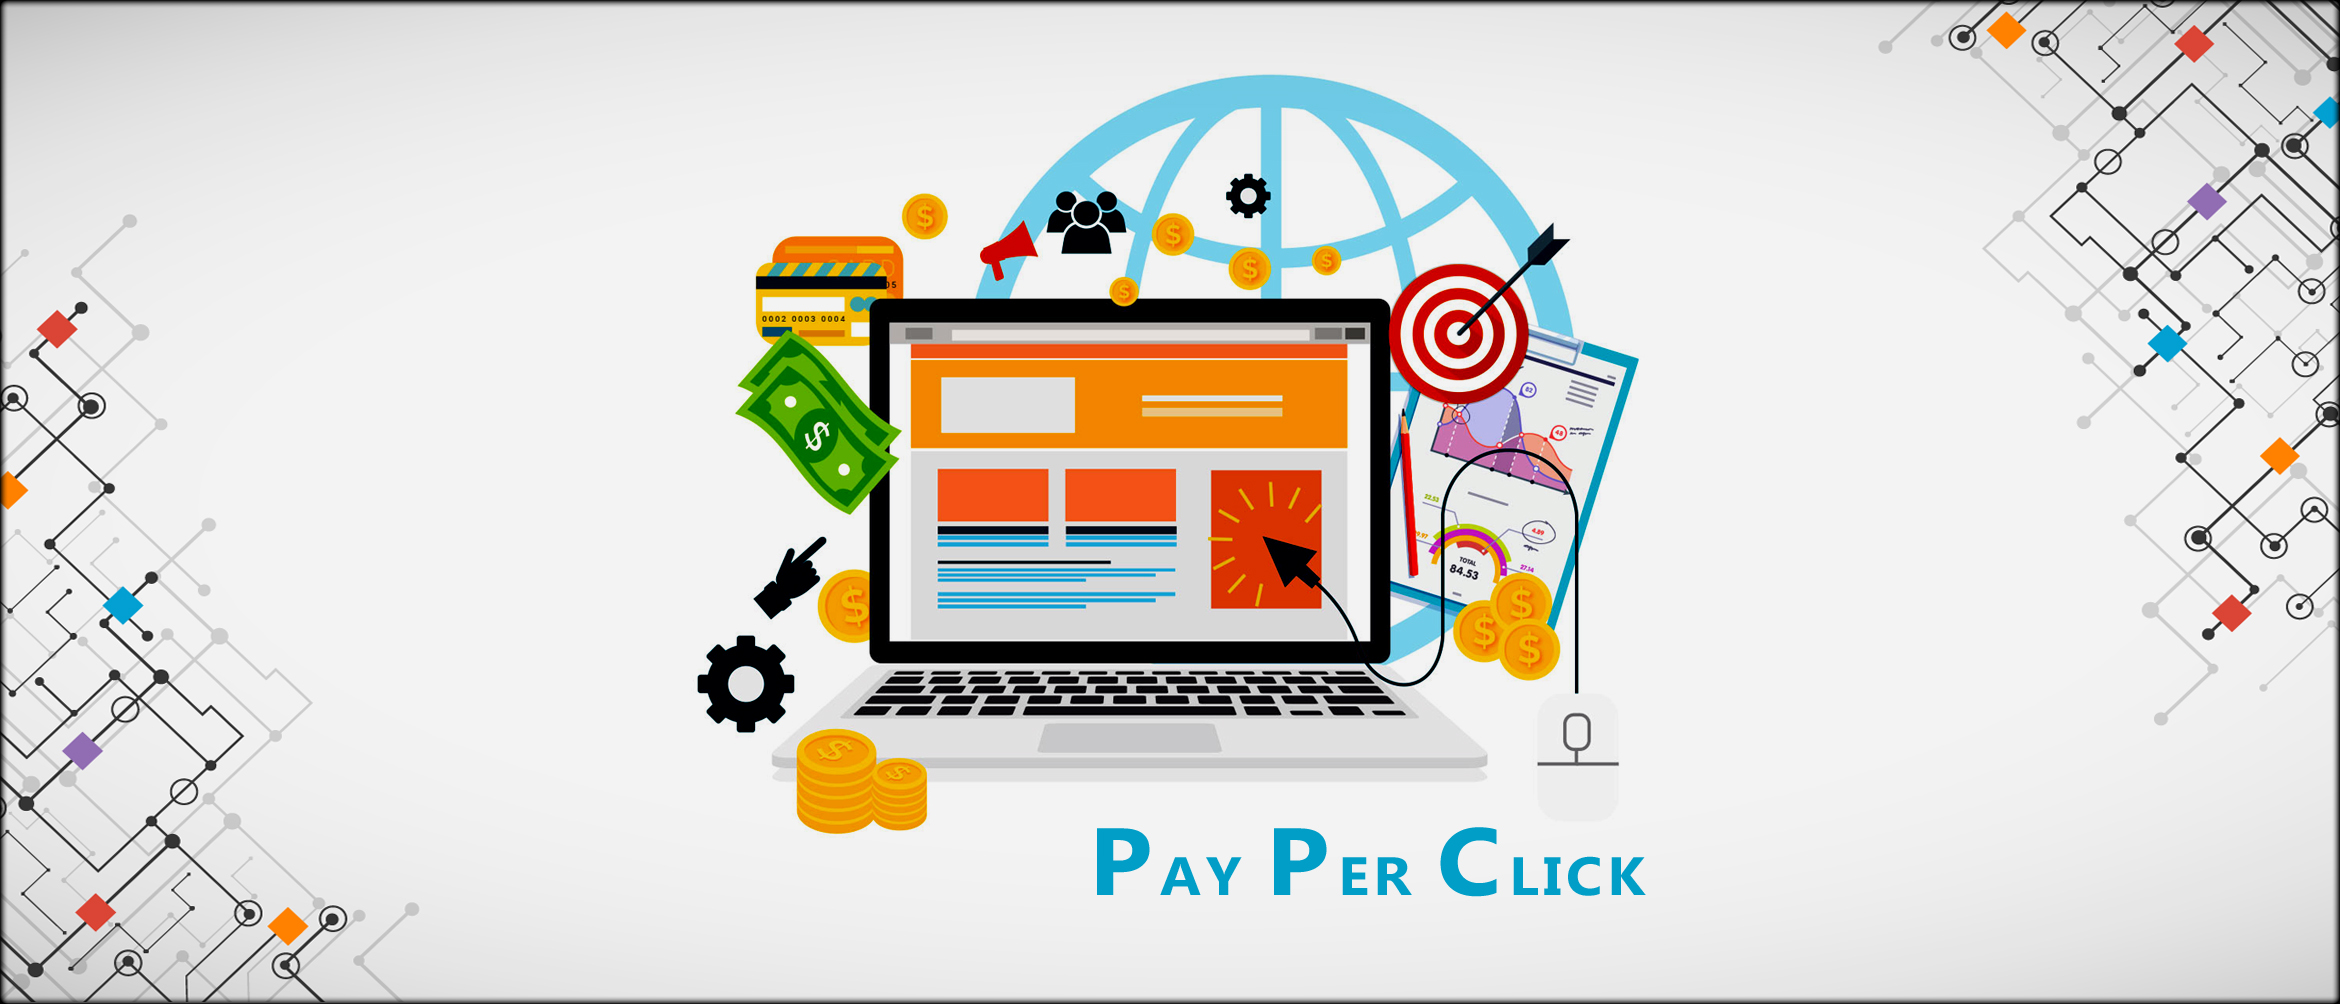 SEO packages, SEO ranking packages, social media marketing packages, article submission packages, link building packages, PPC packages, content writing packages, e-commerce websites, link building, On-page and off-page procedures, website design and seo packages, fixed price seo packages, national seo packages, seo packages pricing, local seo packages, seo packages usa, cheapest social media marketing, social media packages usa, monthly social media package, social media marketing packages in delhi, social media marketing packages mumbai, social media marketing packages pune, ppc packages in delhi, ppc packages India